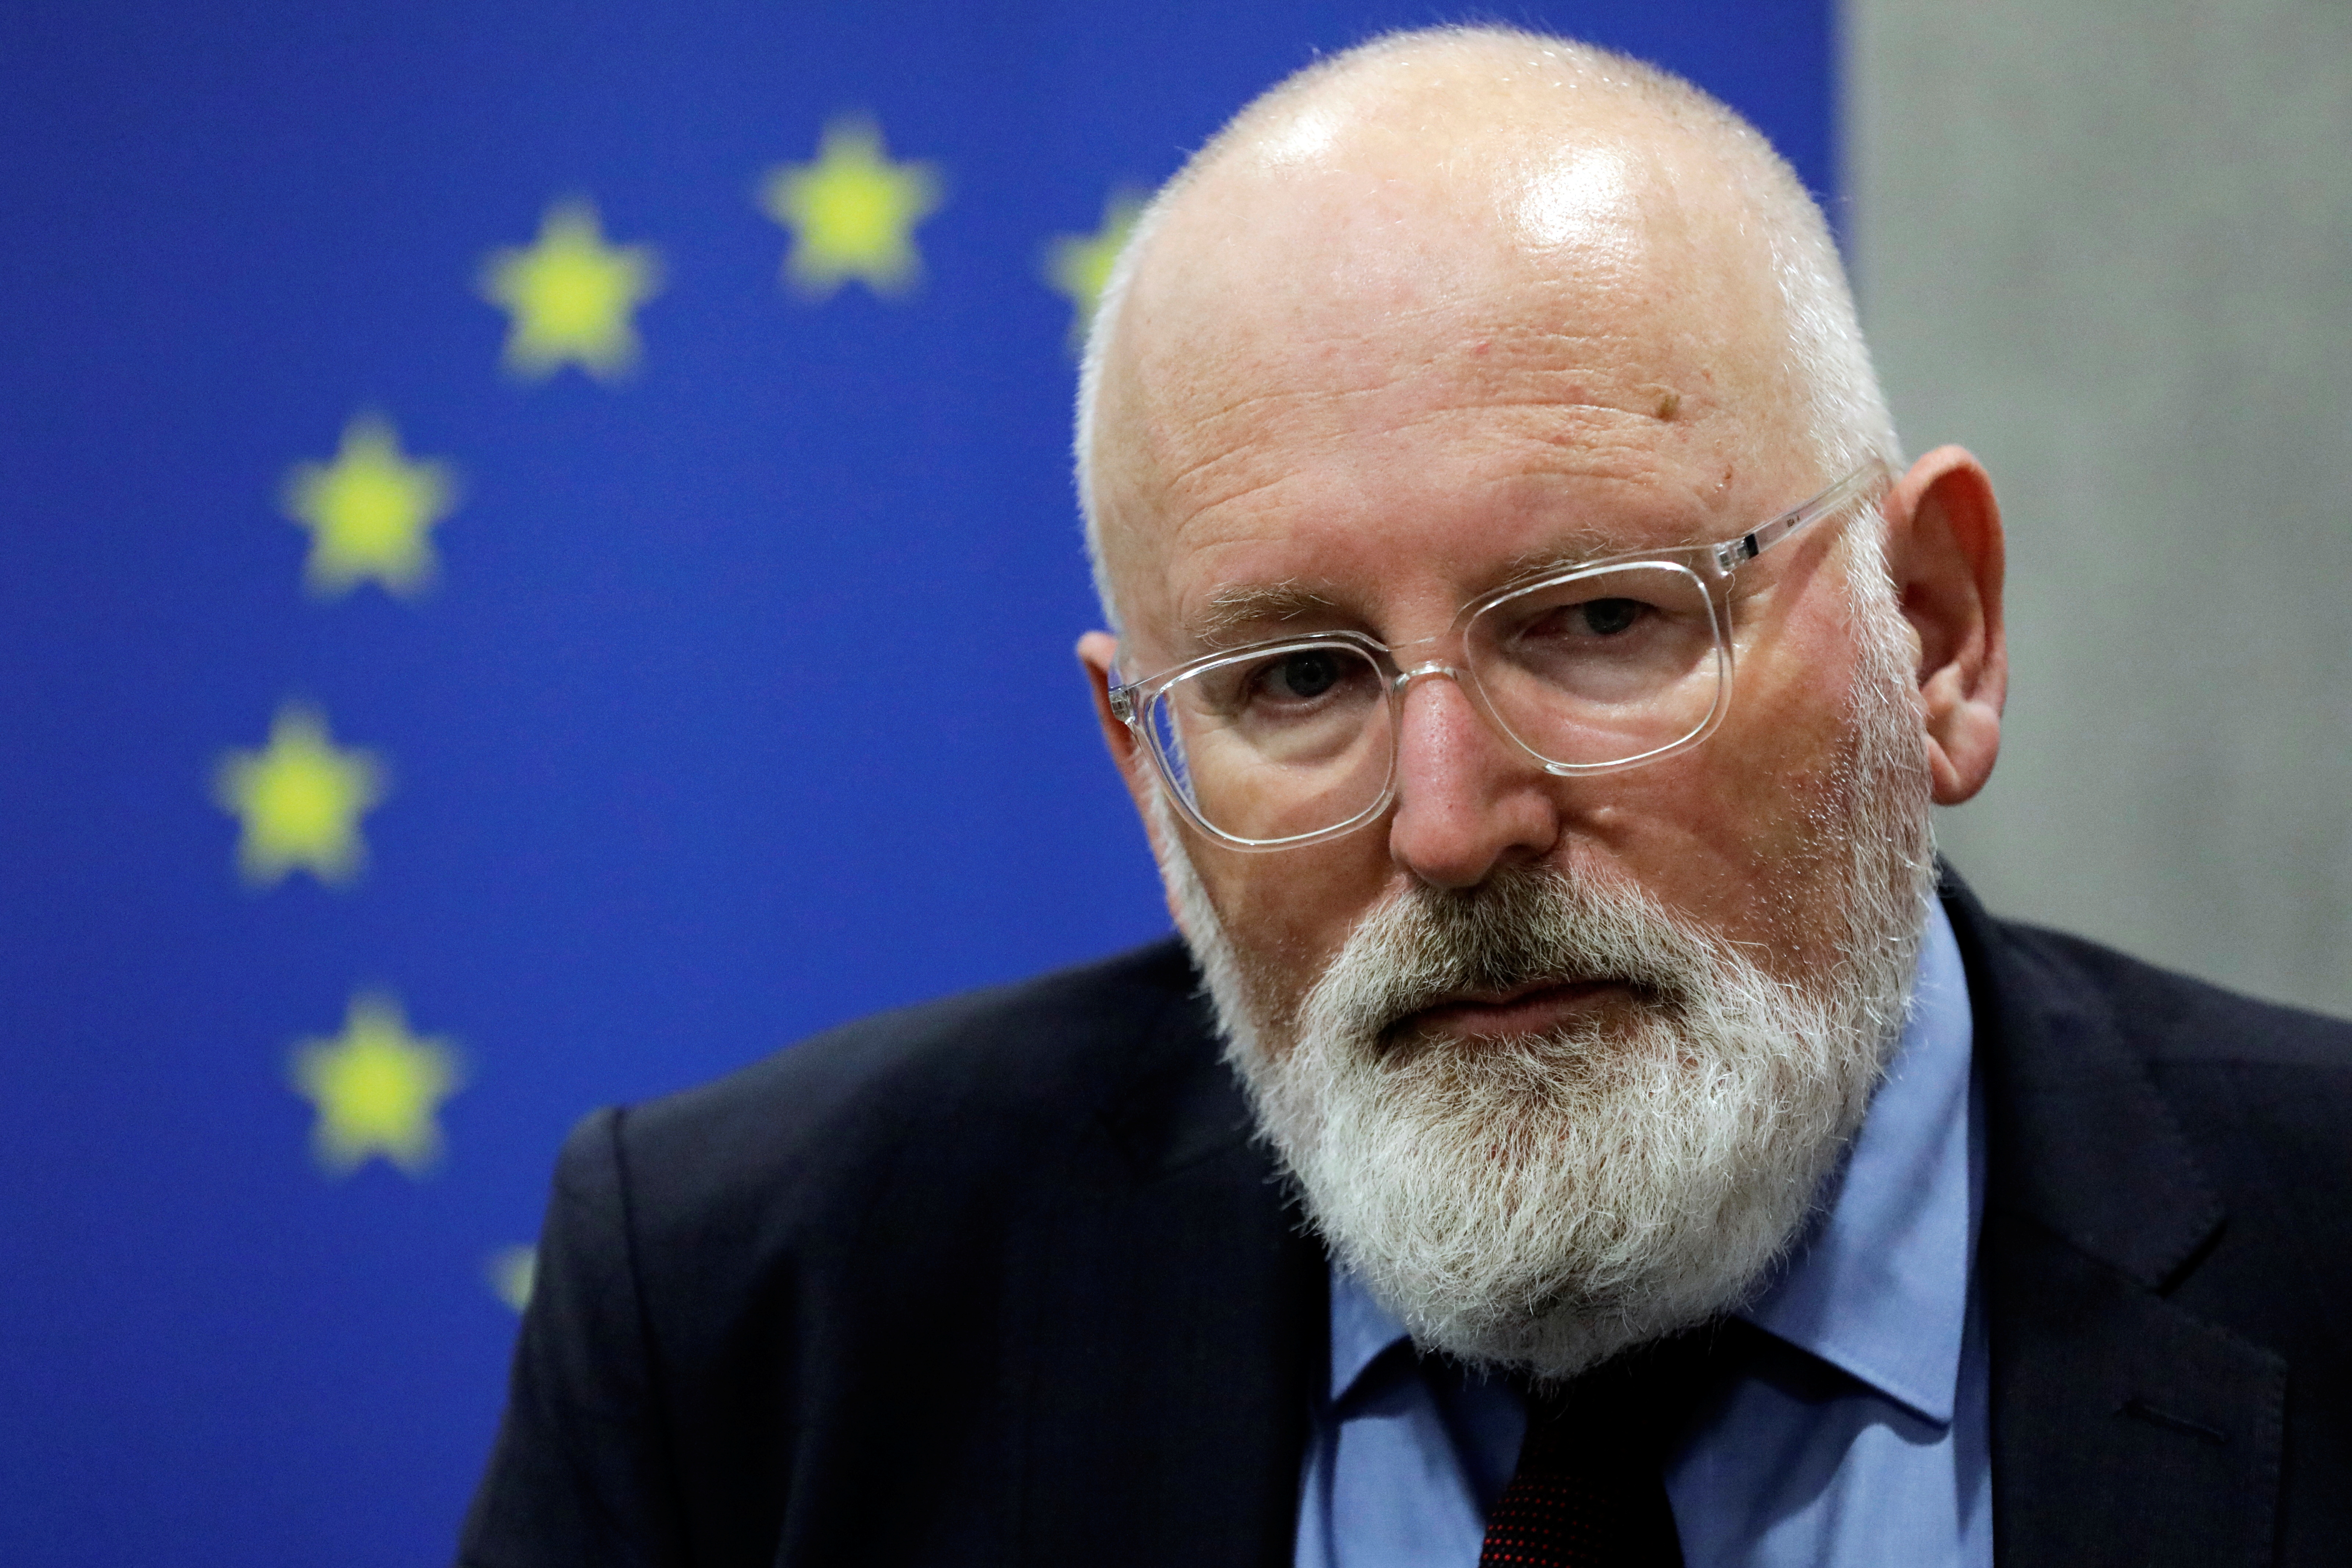 Frans Timmermans, European Commission Executive Vice President and European Commissioner for the European Green Deal speaks during an interview at EU Delegation office in Jakarta, Indonesia, October 18, 2021. REUTERS/Ajeng Dinar Ulfiana